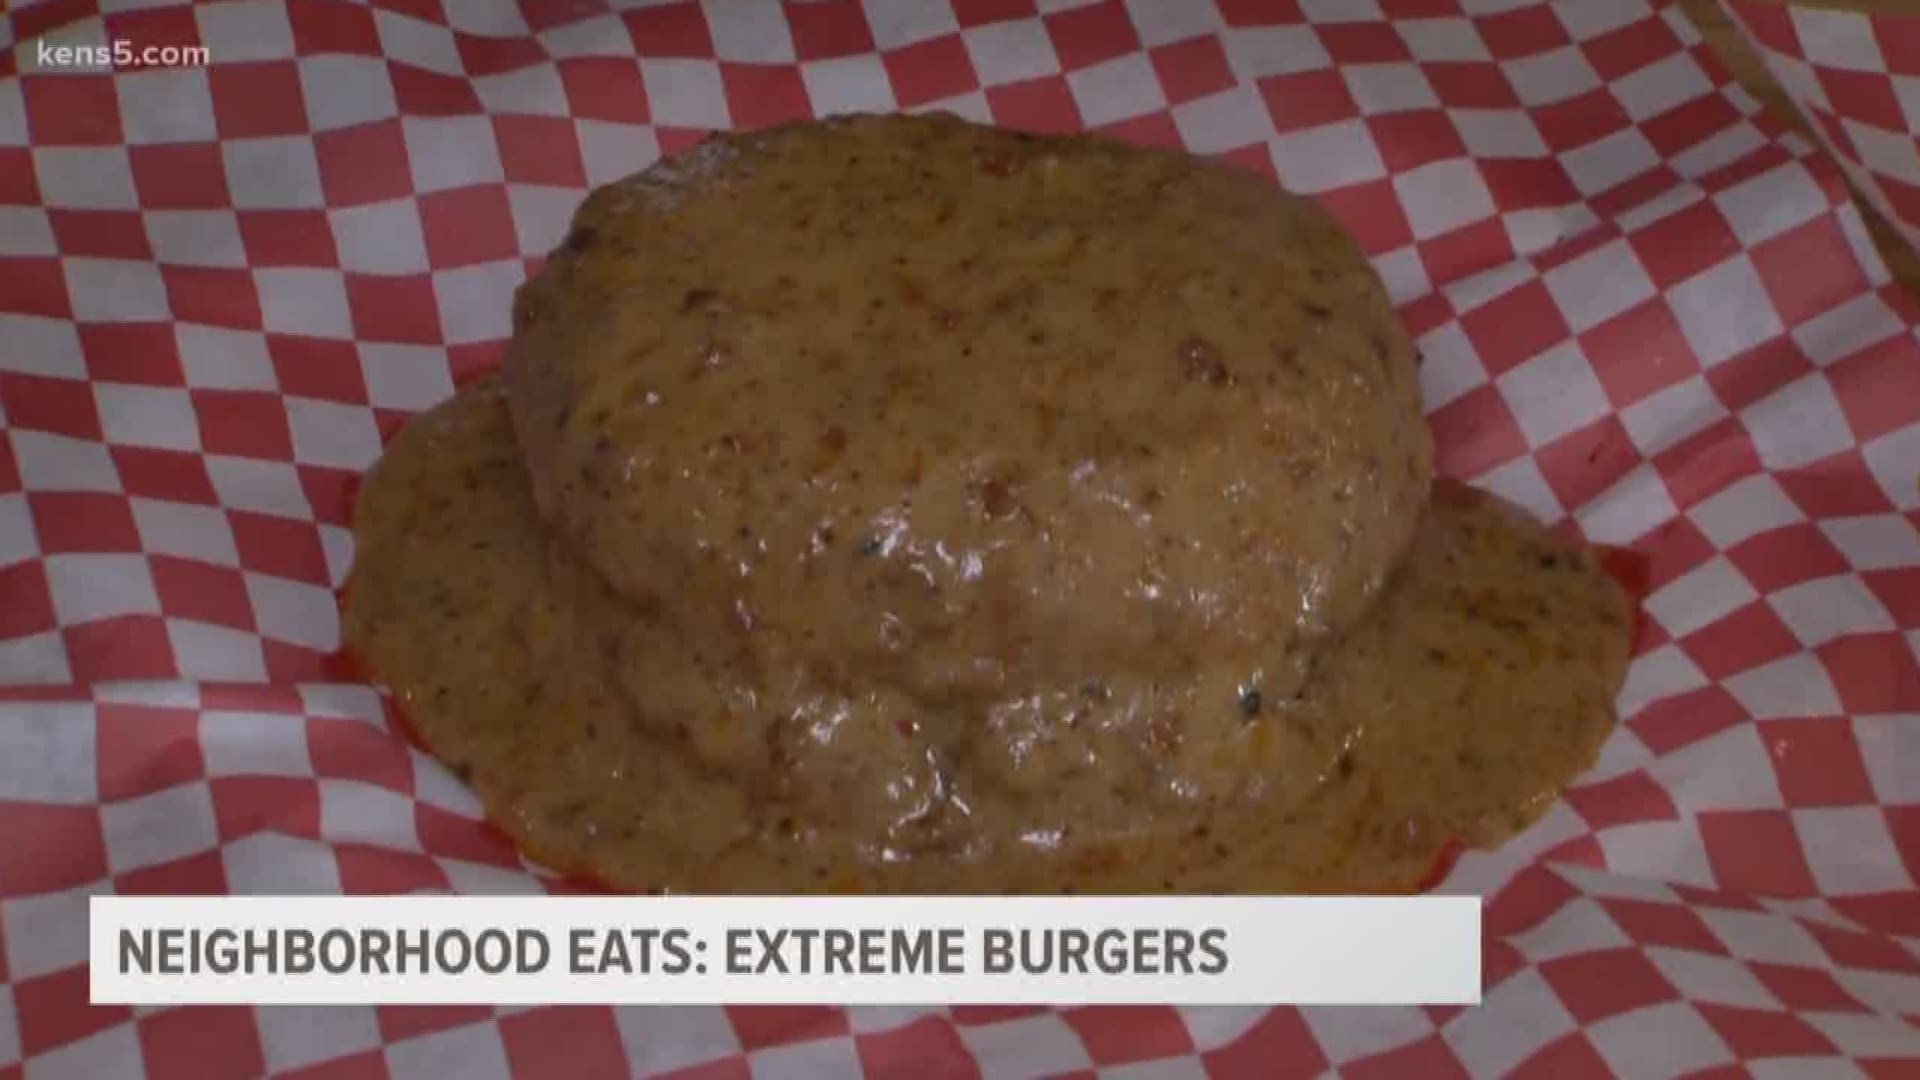 We tasted the city's most EXTREME burgers!